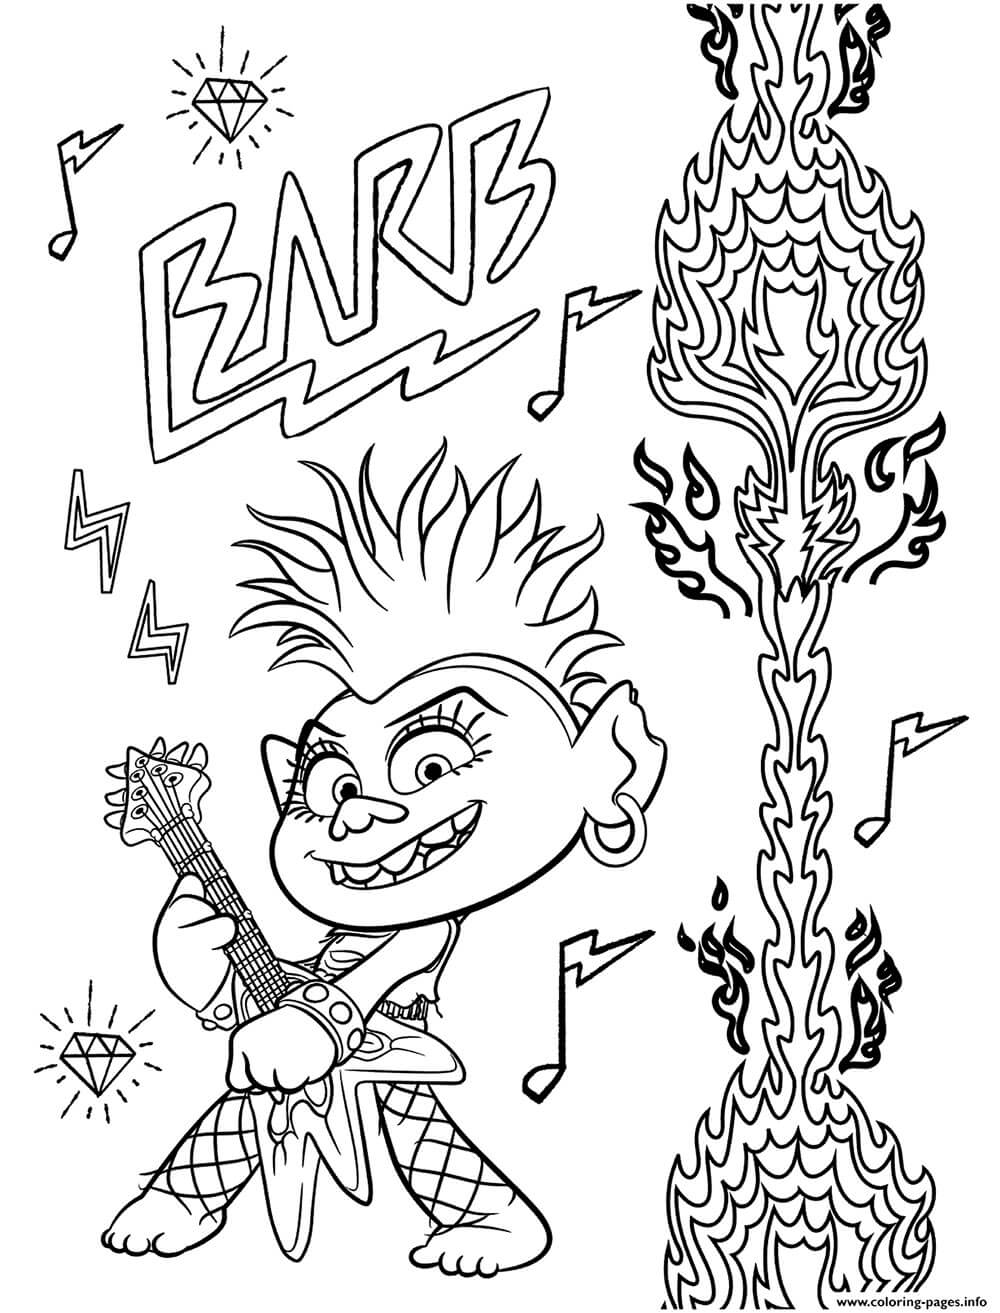 Queen Barb Trolls Coloring Page